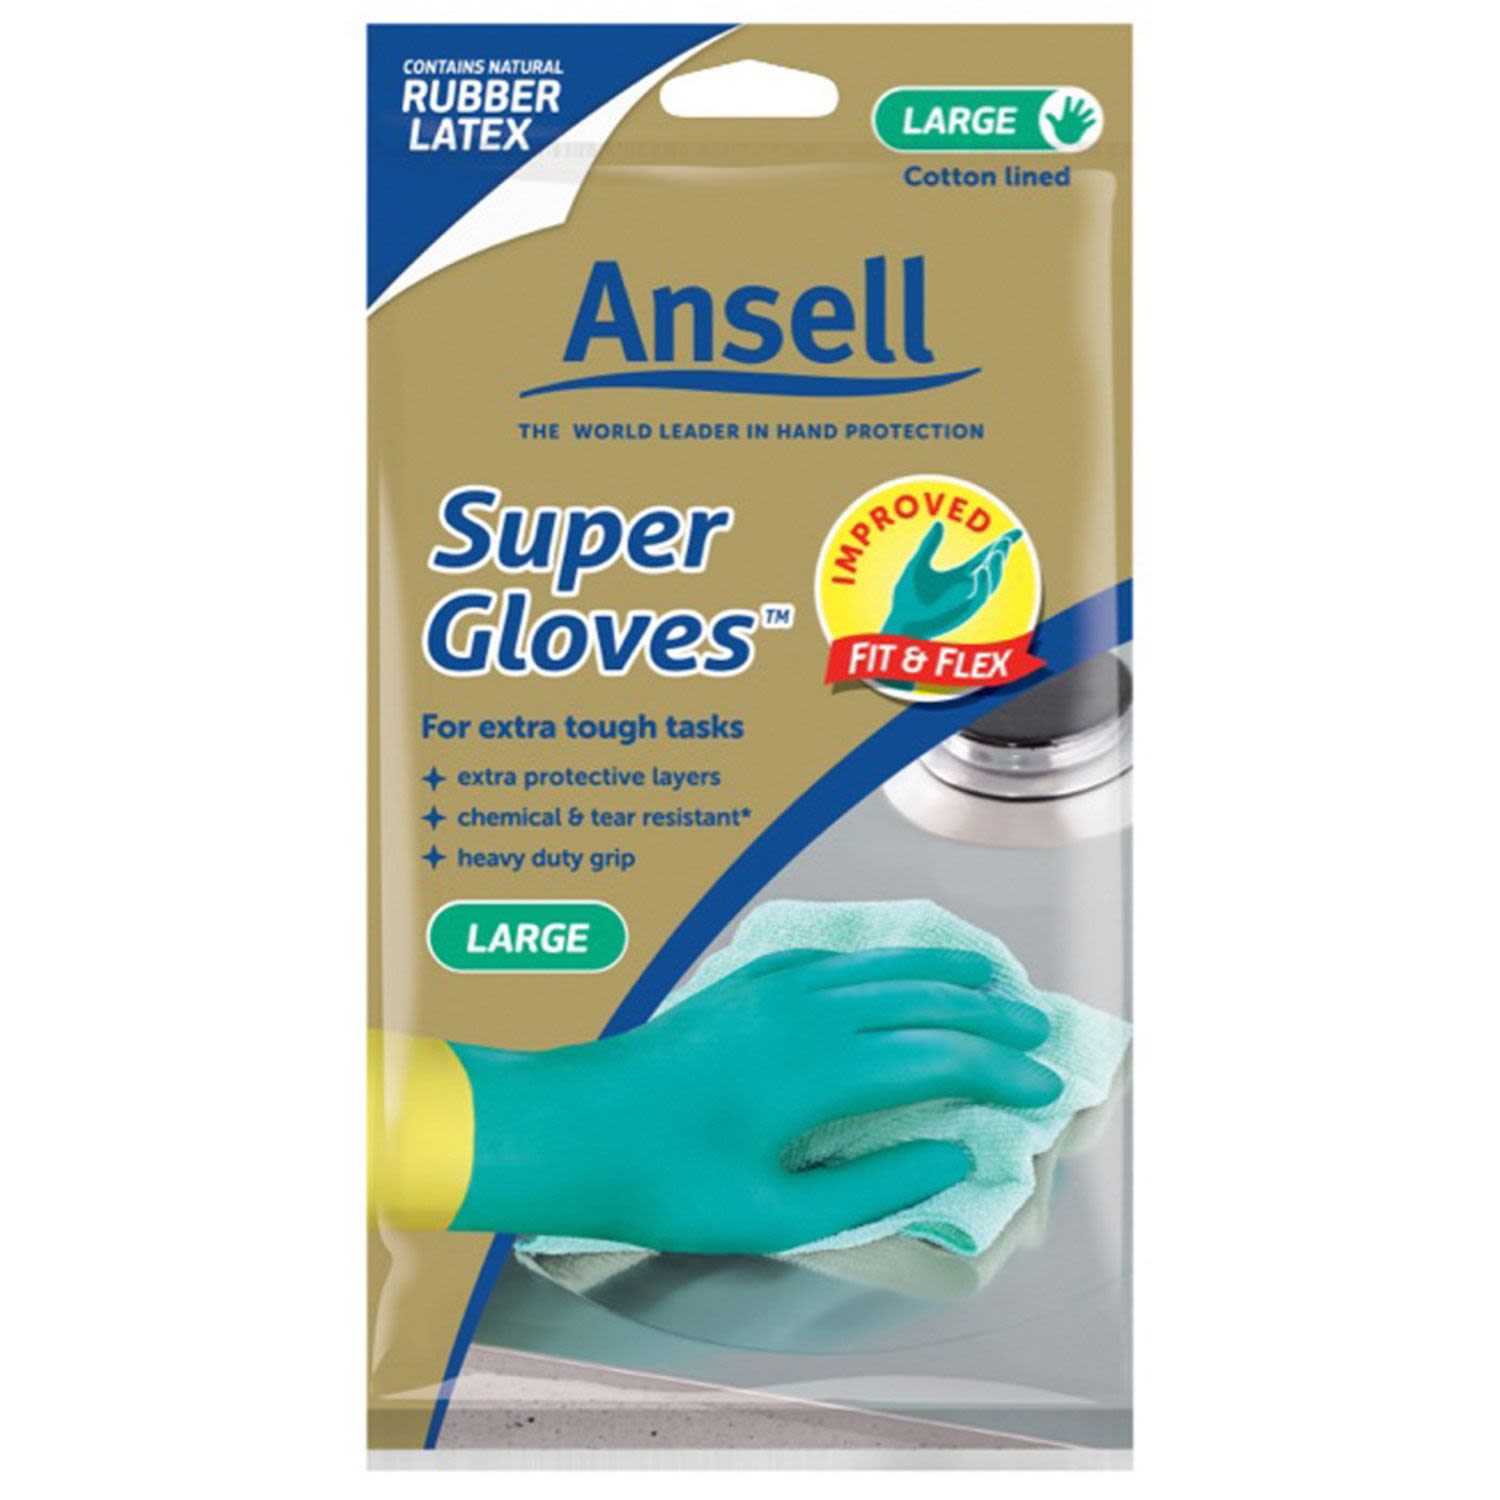 Ansell Gloves Super Large Size 9, 1 Each